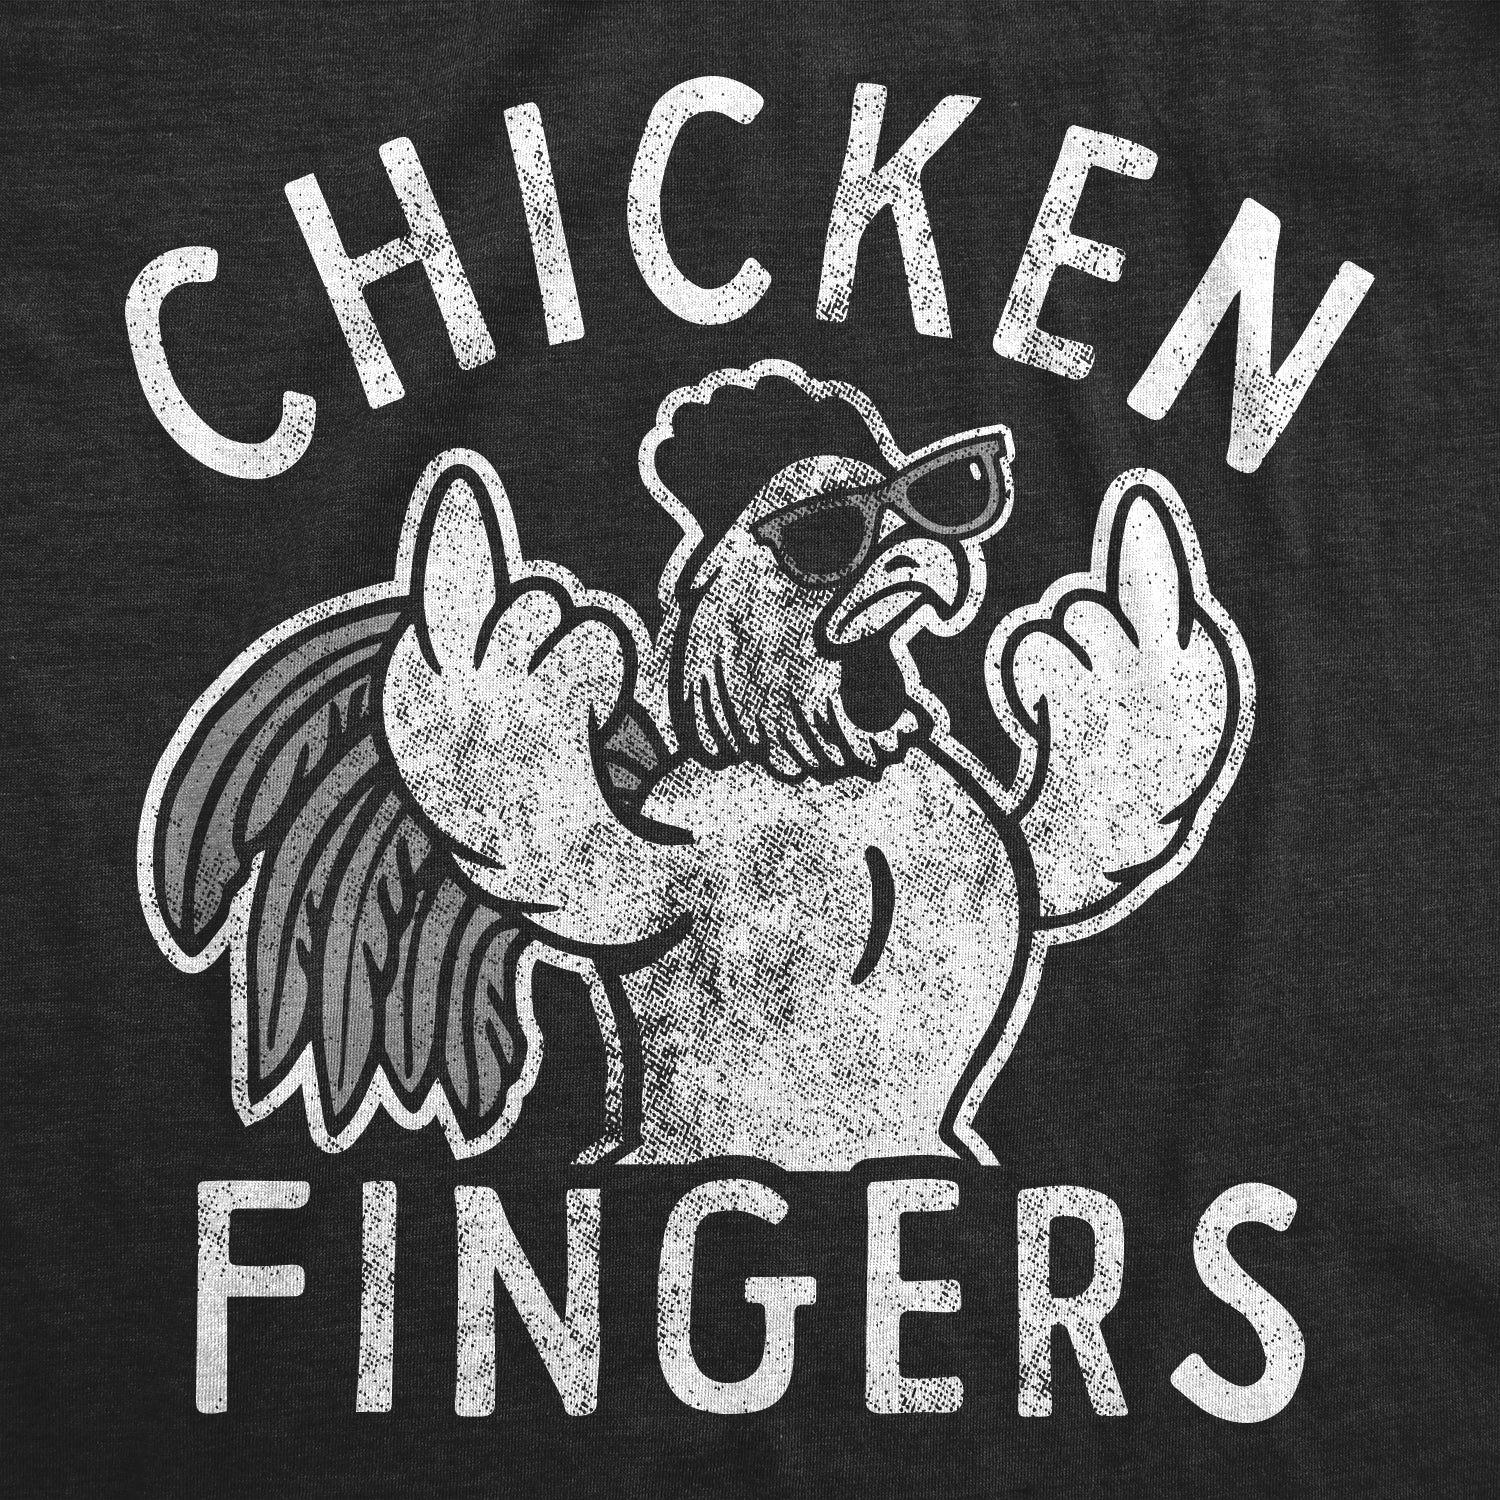 Funny Heather Black - Chicken Fingers Chicken Fingers Mens T Shirt Nerdy Sarcastic animal Tee